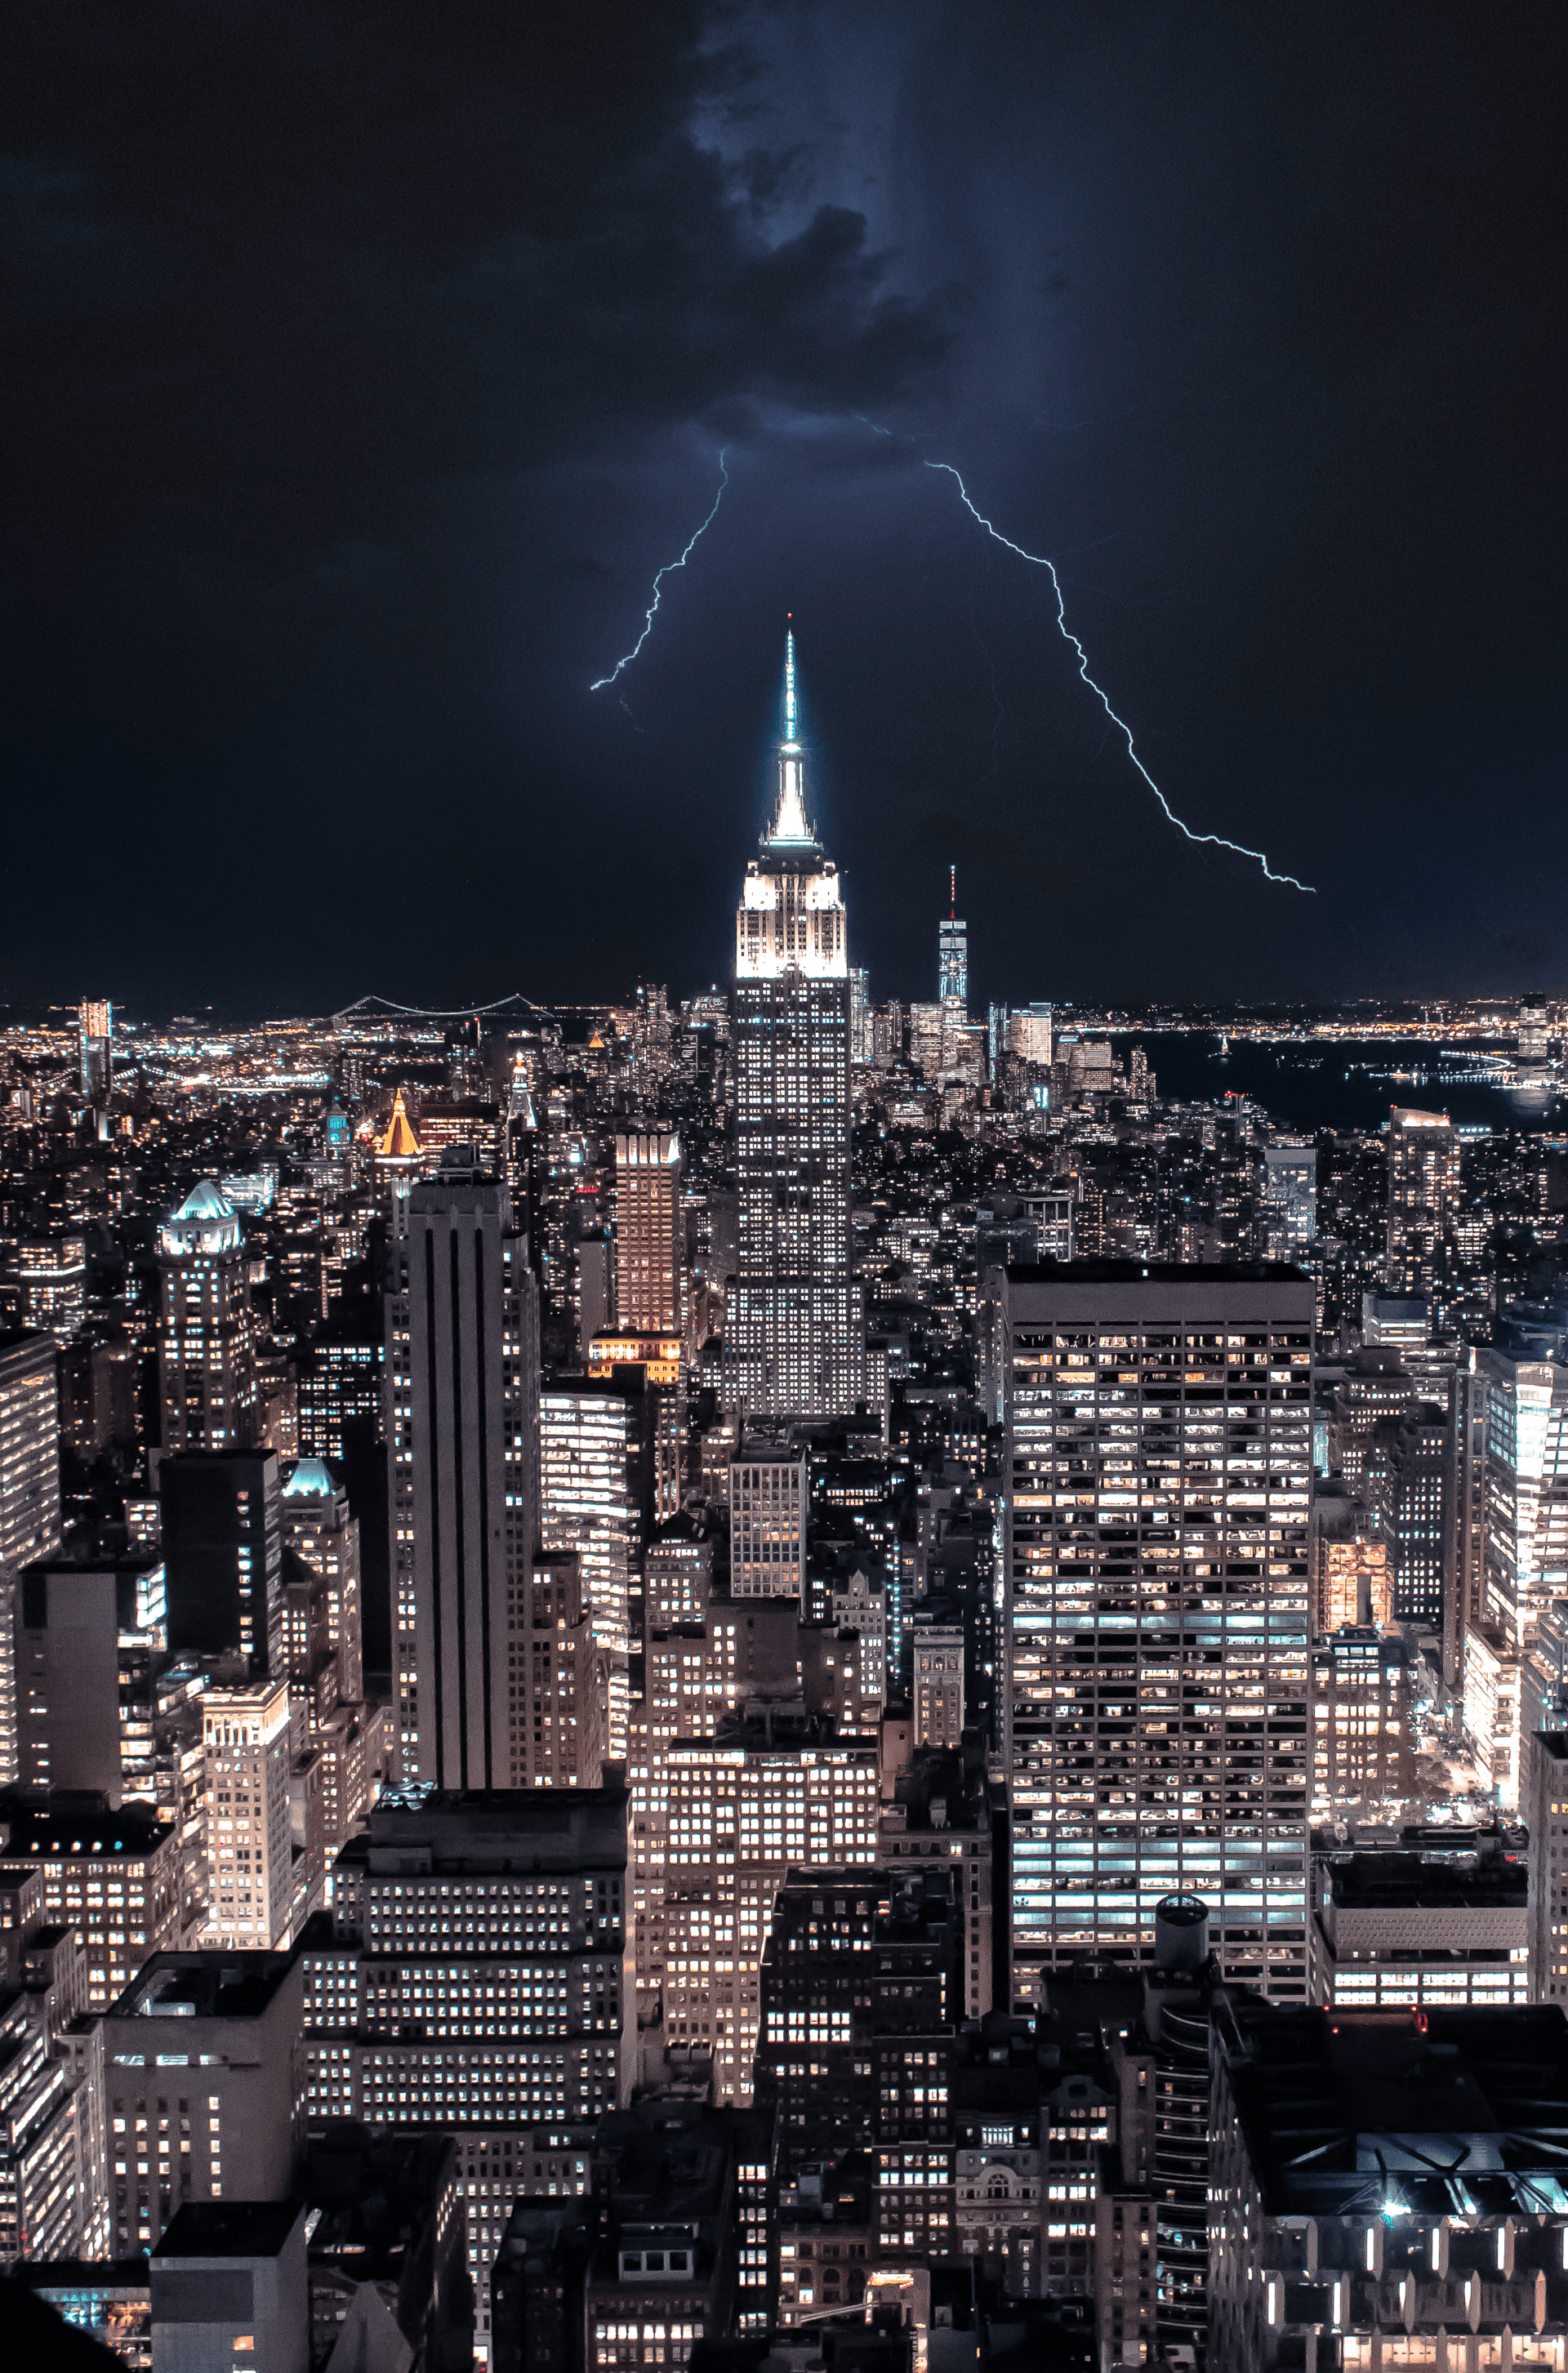 Lightning strikes over the empire state building in new york city